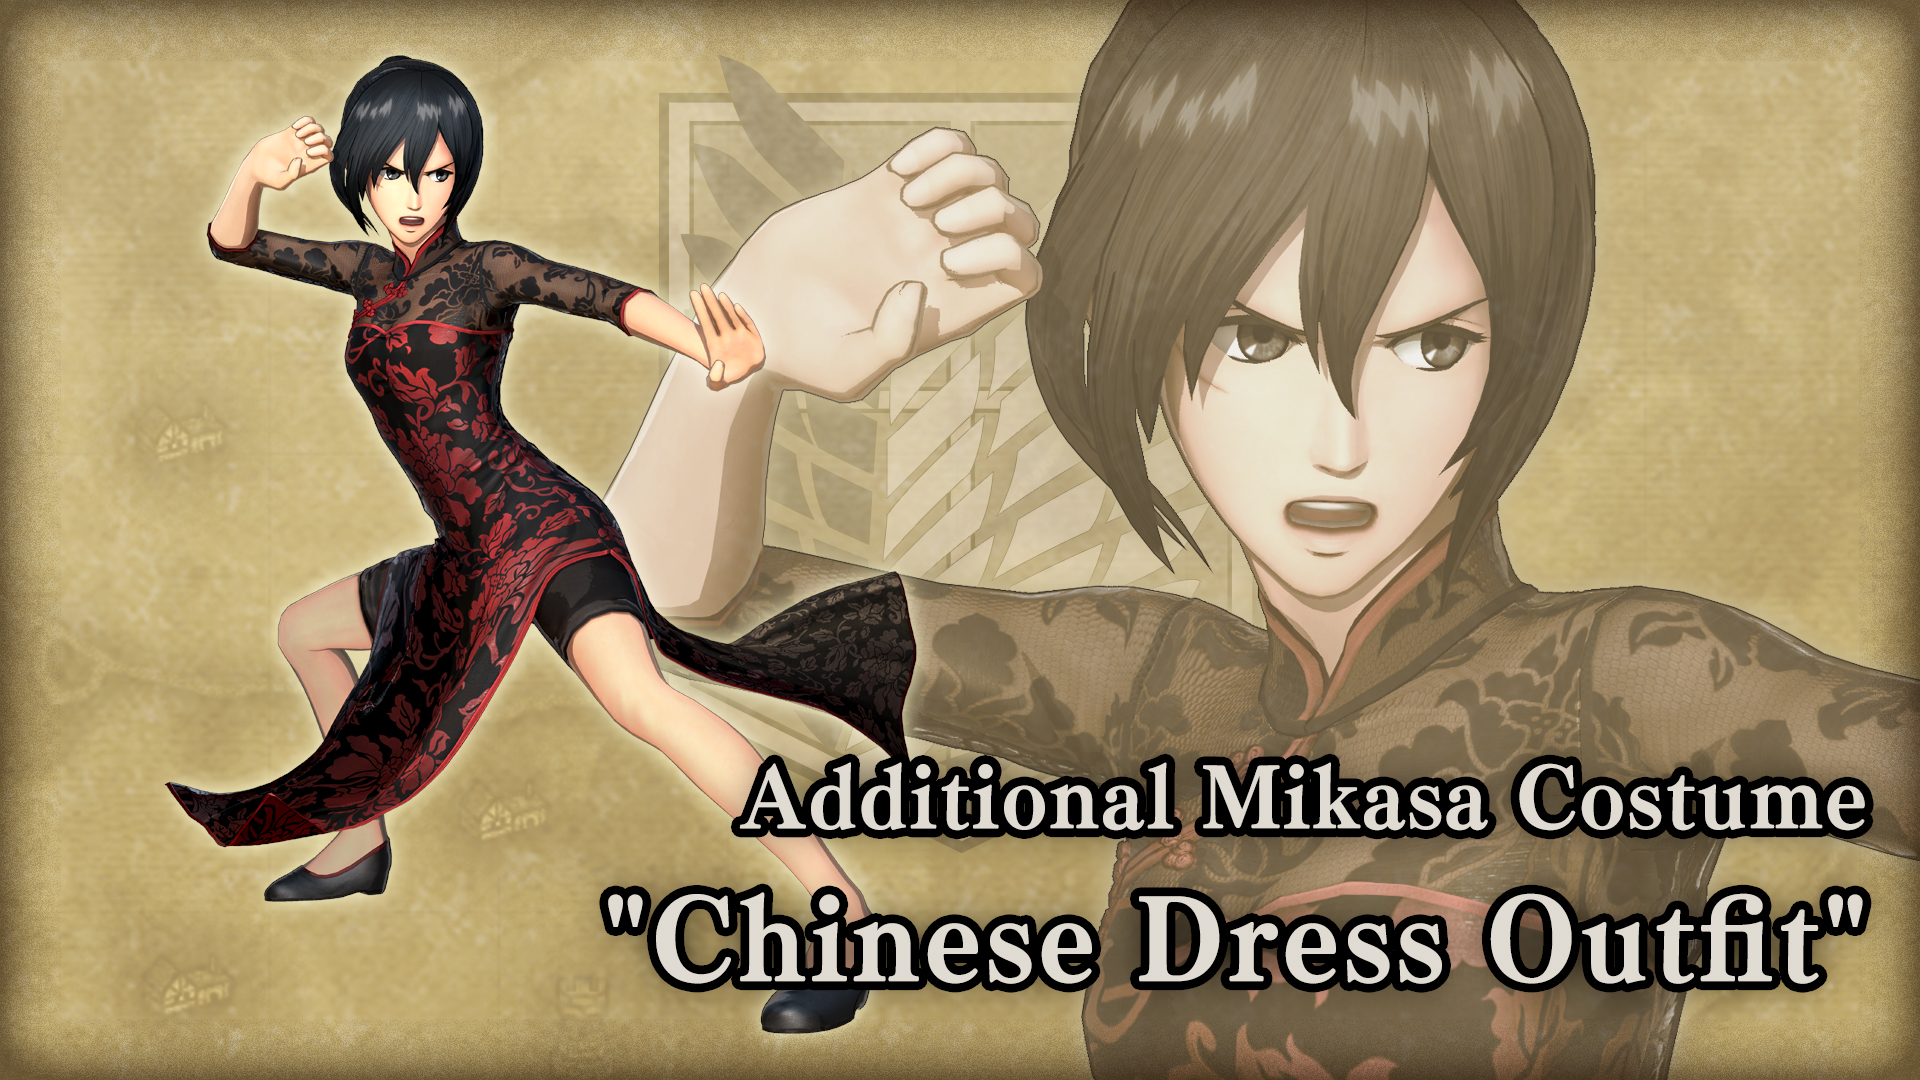 Additional Mikasa Costume: "Chinese Dress Outfit"